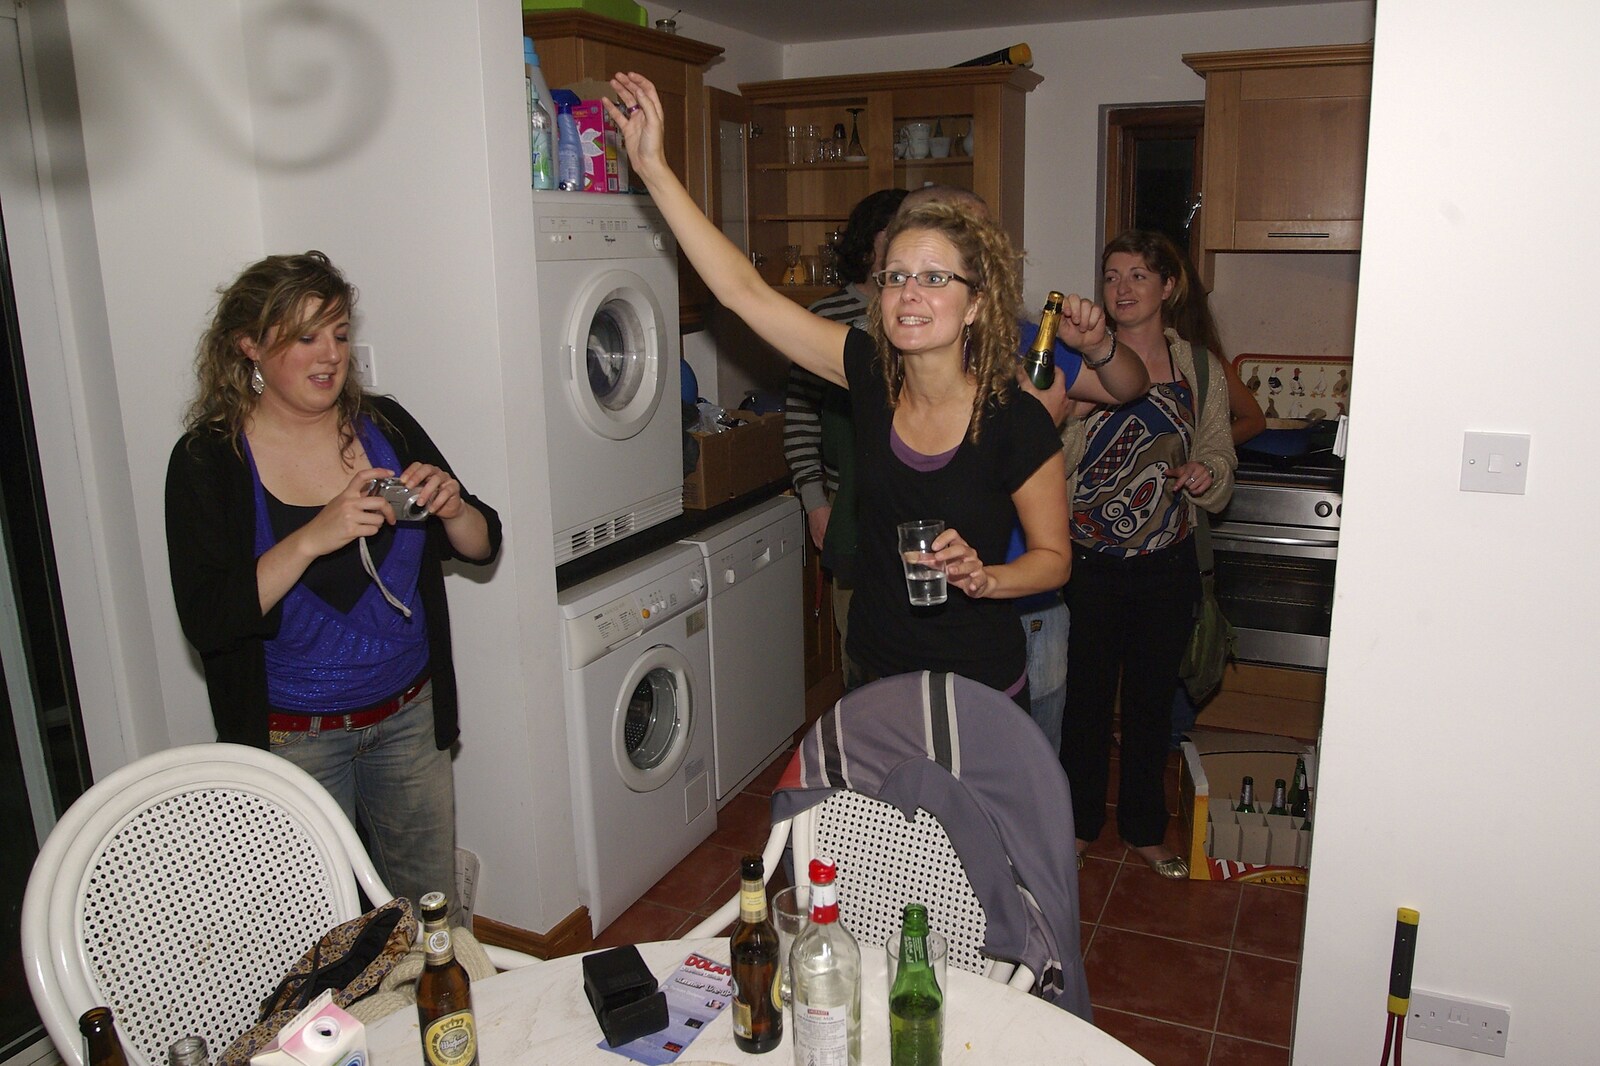 30th Birthday Party in Kilkee, County Clare, Ireland - 22nd September 2007: Hands up